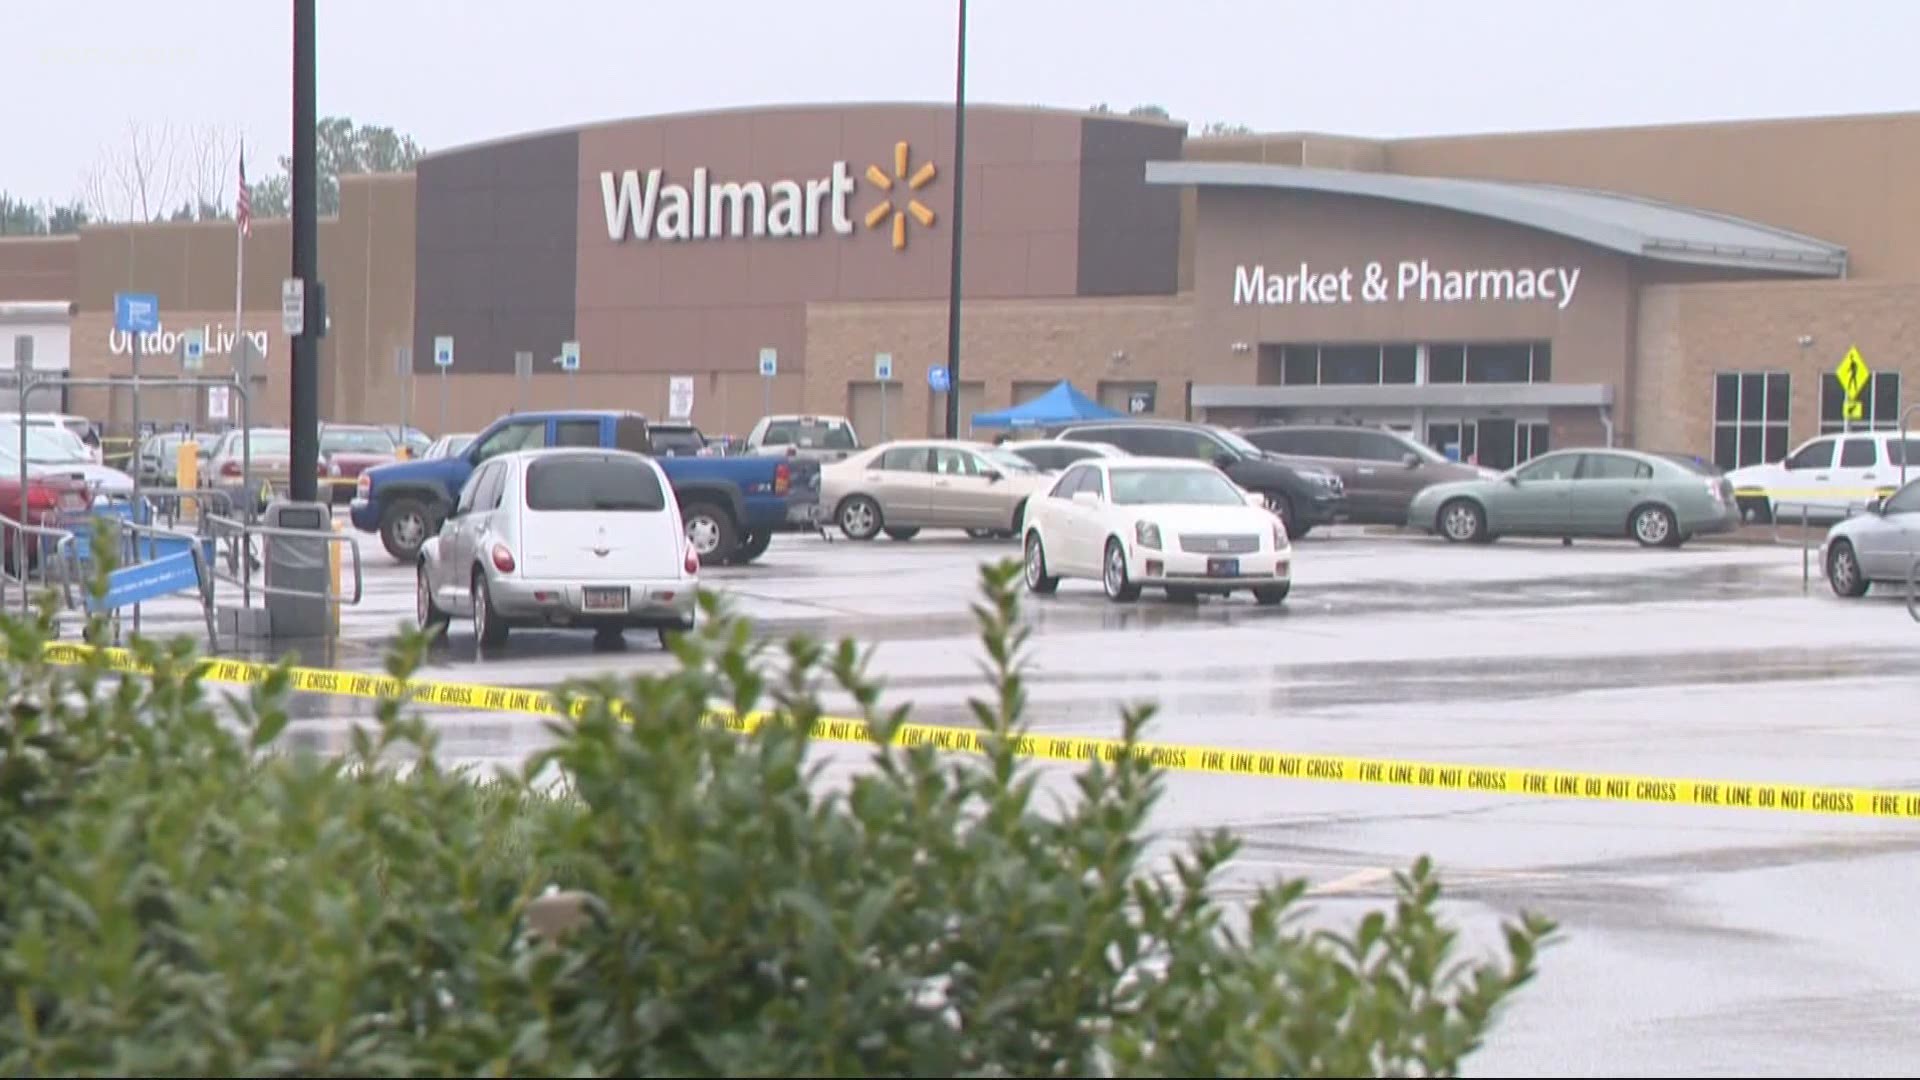 Police were called to the Walmart for a reported shoplifting. The McCree family and civil rights leaders held a news conference asking for further investigation.